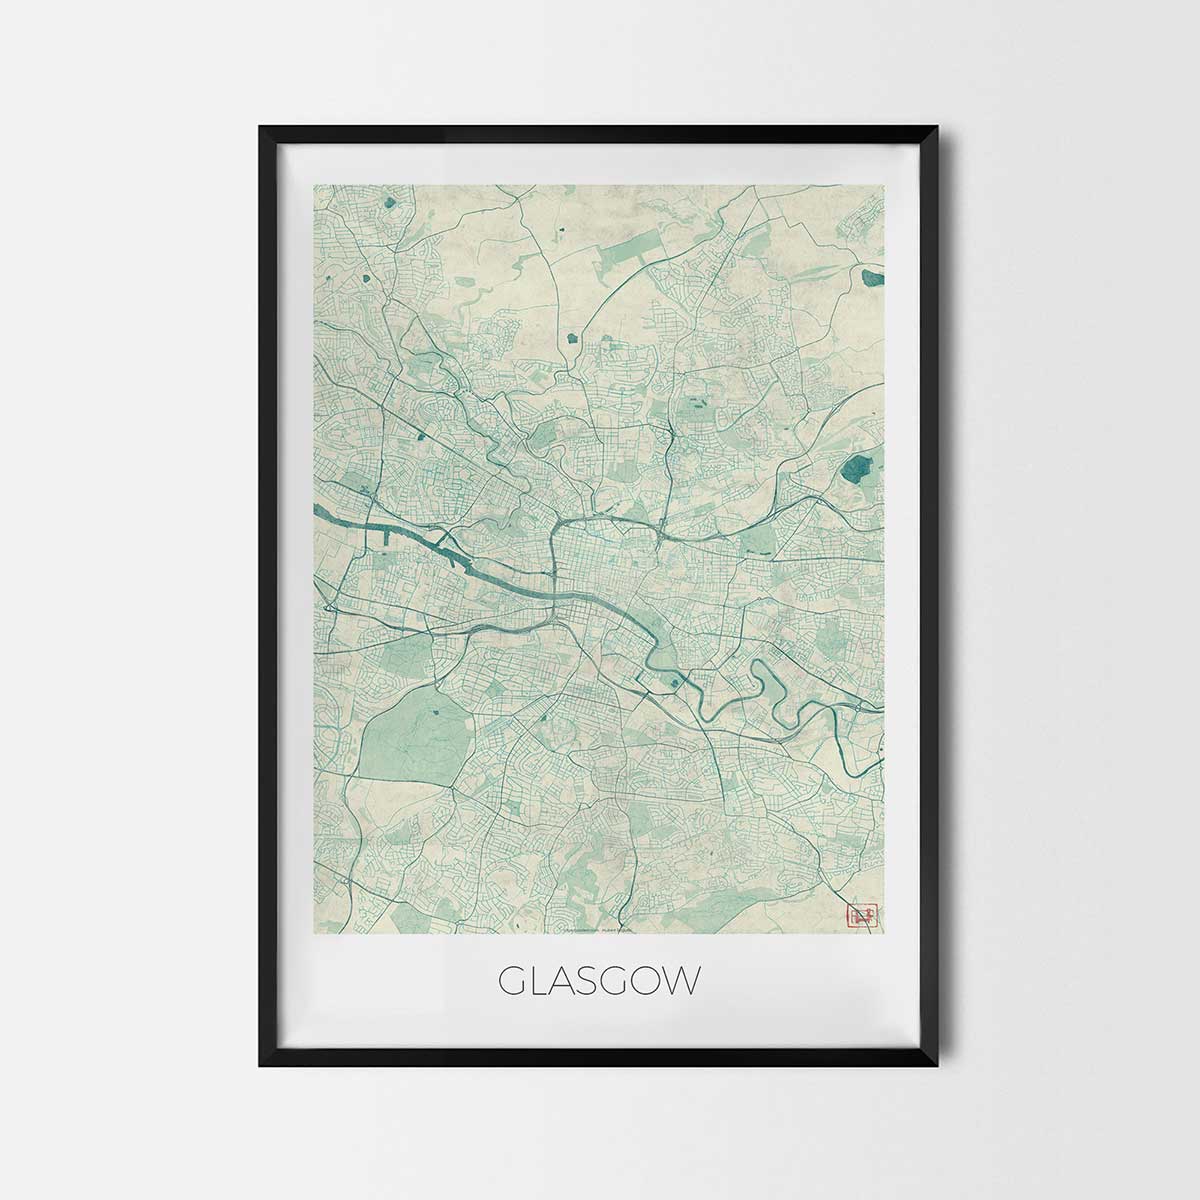 Glasgow art posters city map art posters map posters city art prints city posters